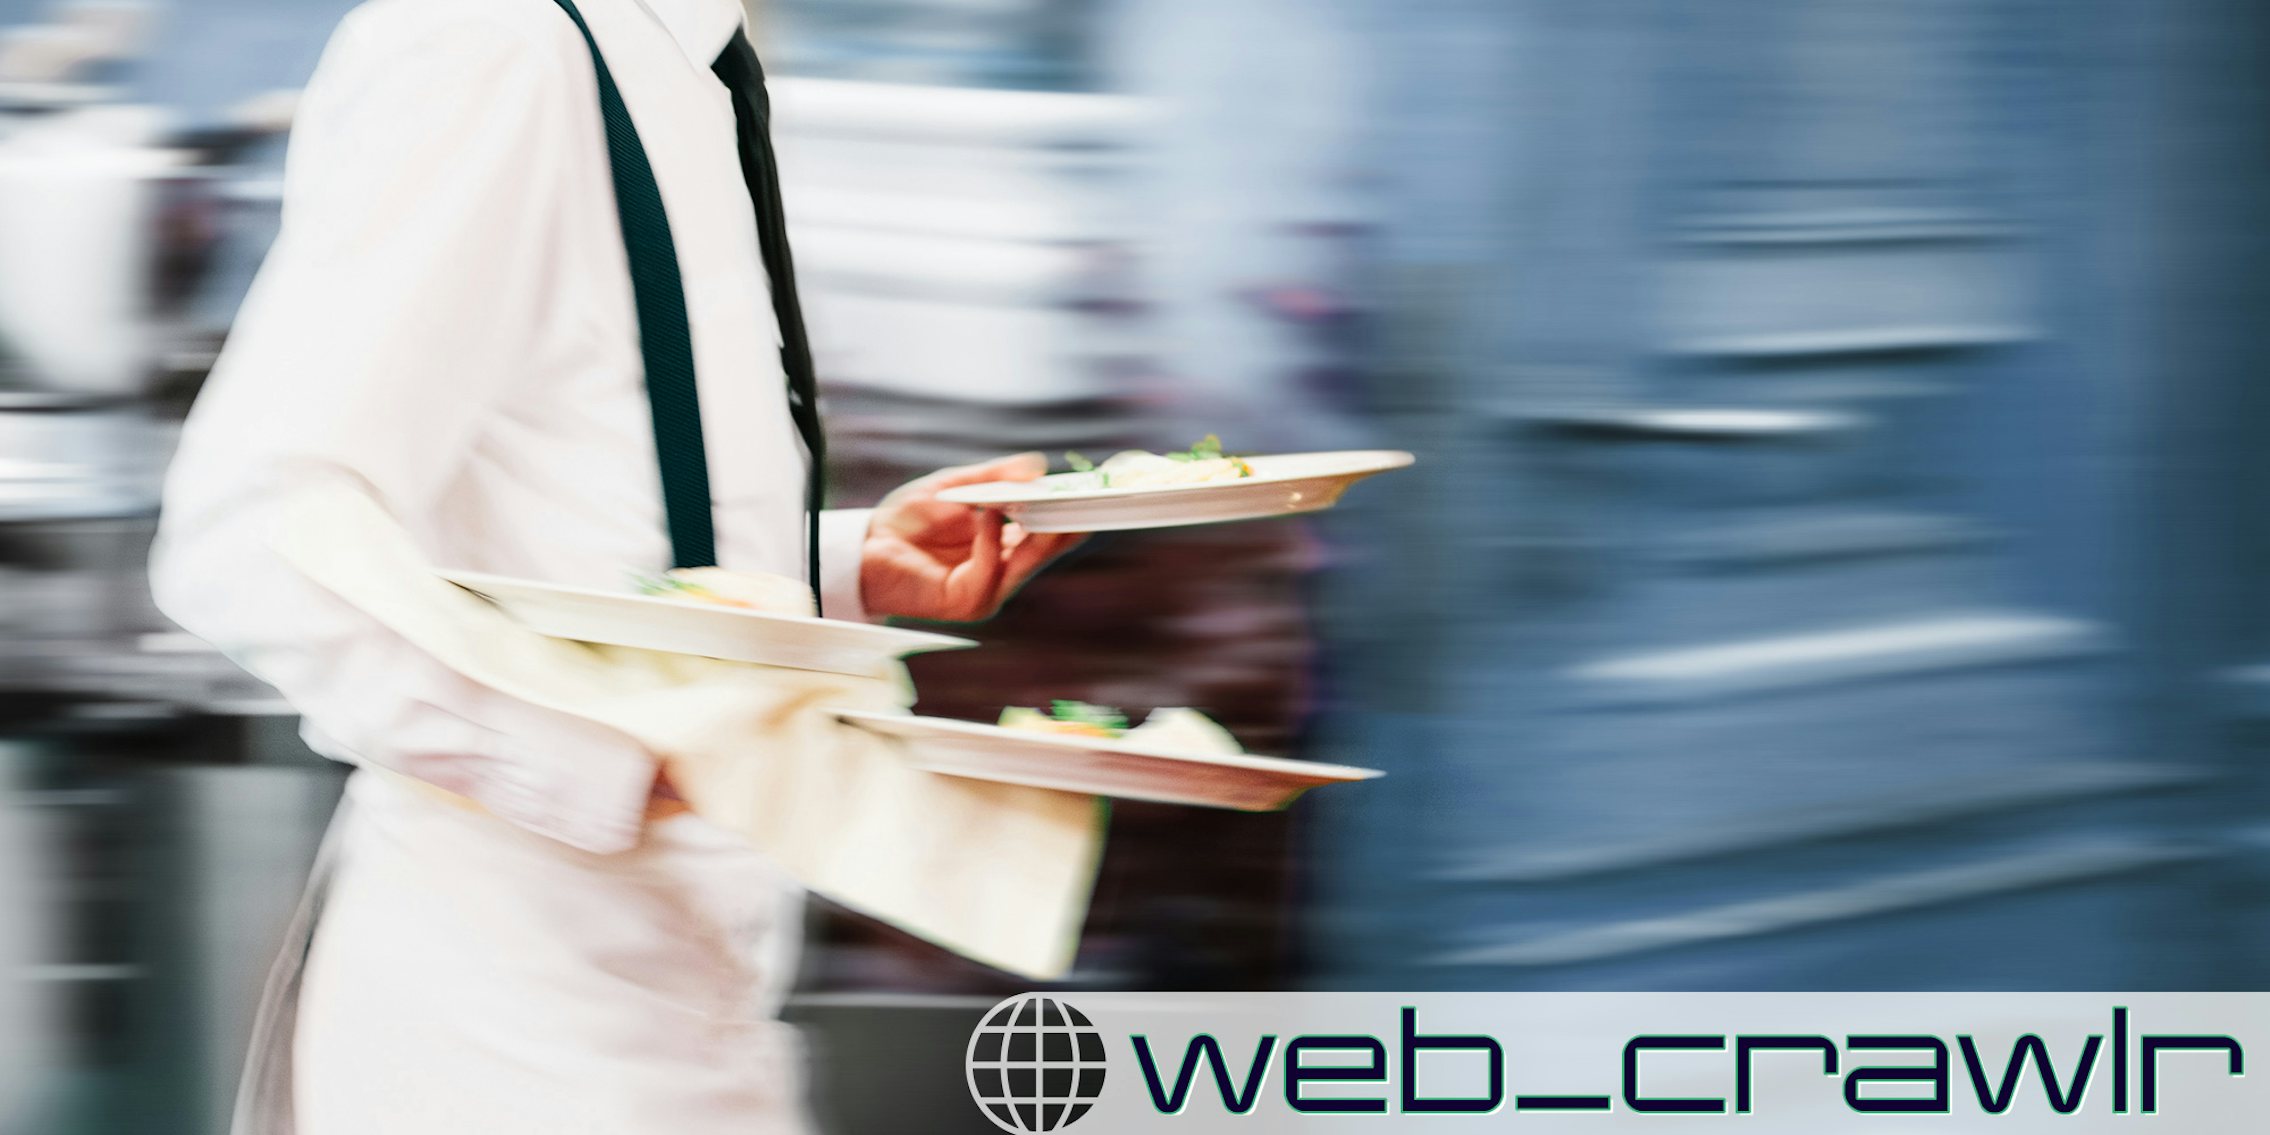 A waiter carrying plates of food. The Daily Dot newsletter web_crawlr logo is in the bottom right corner.